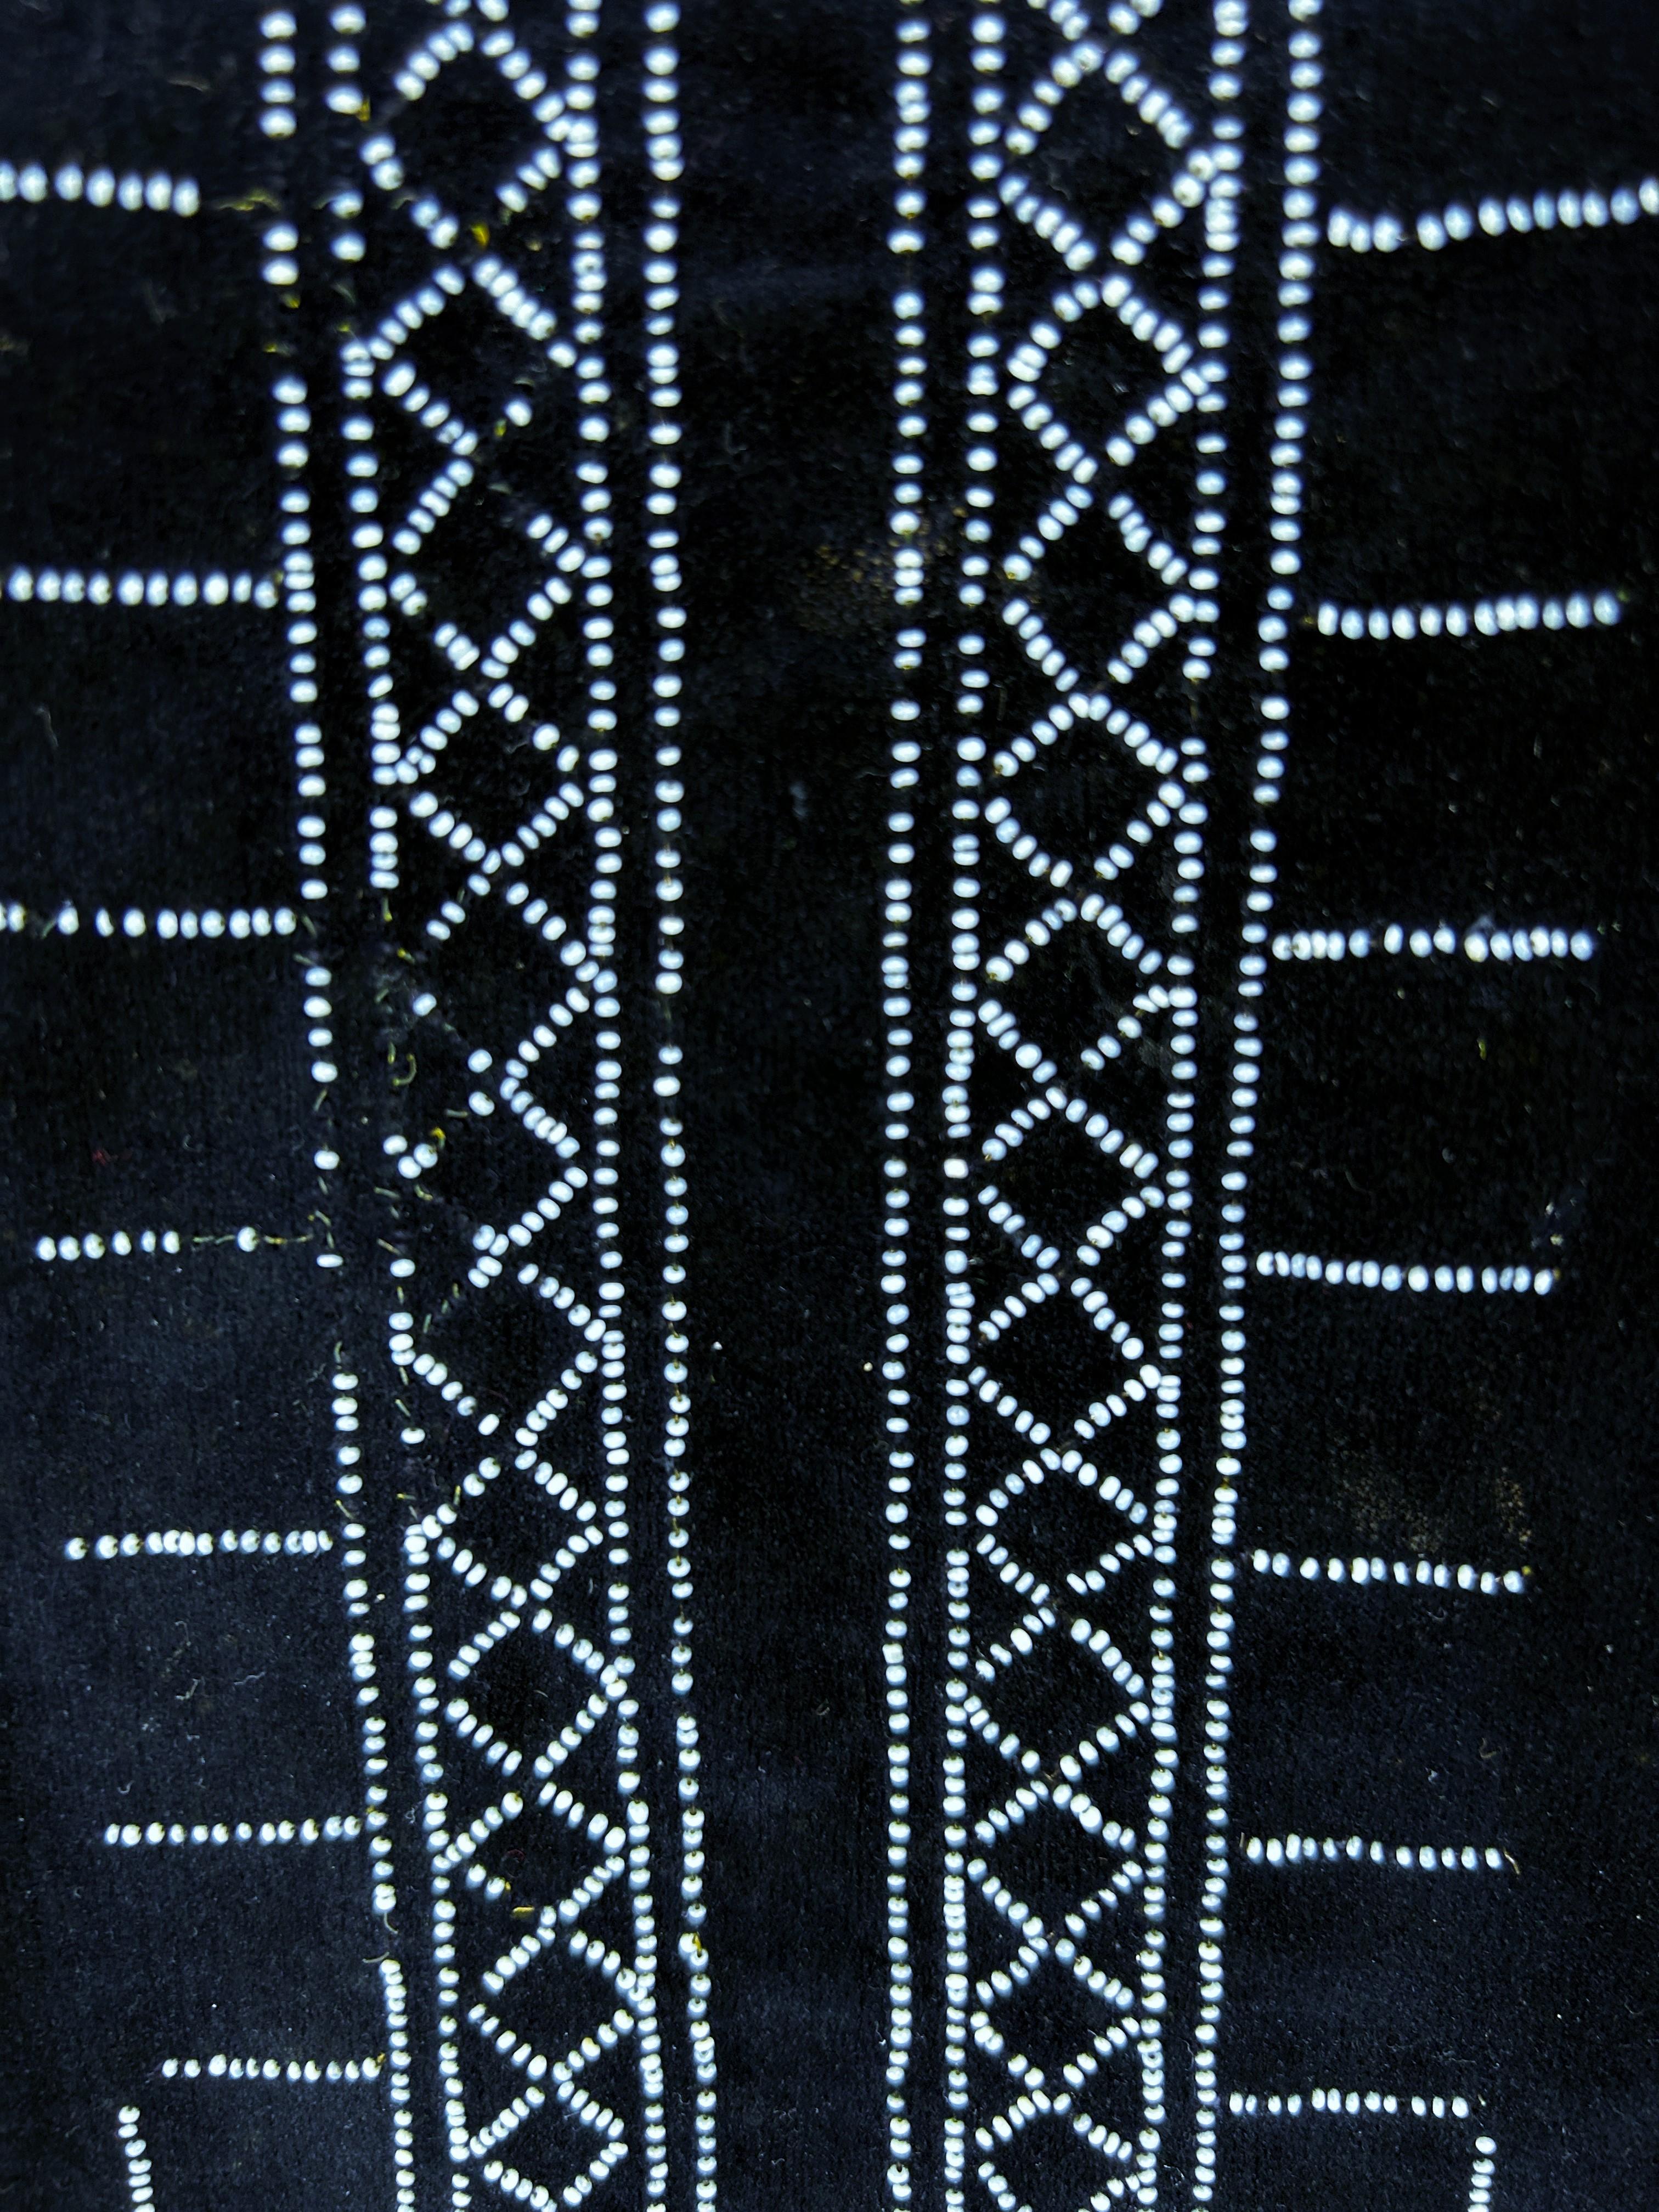 A Navy Velvet Sac Dress with glass beads embroideries - France Circa 1925-1930 For Sale 6